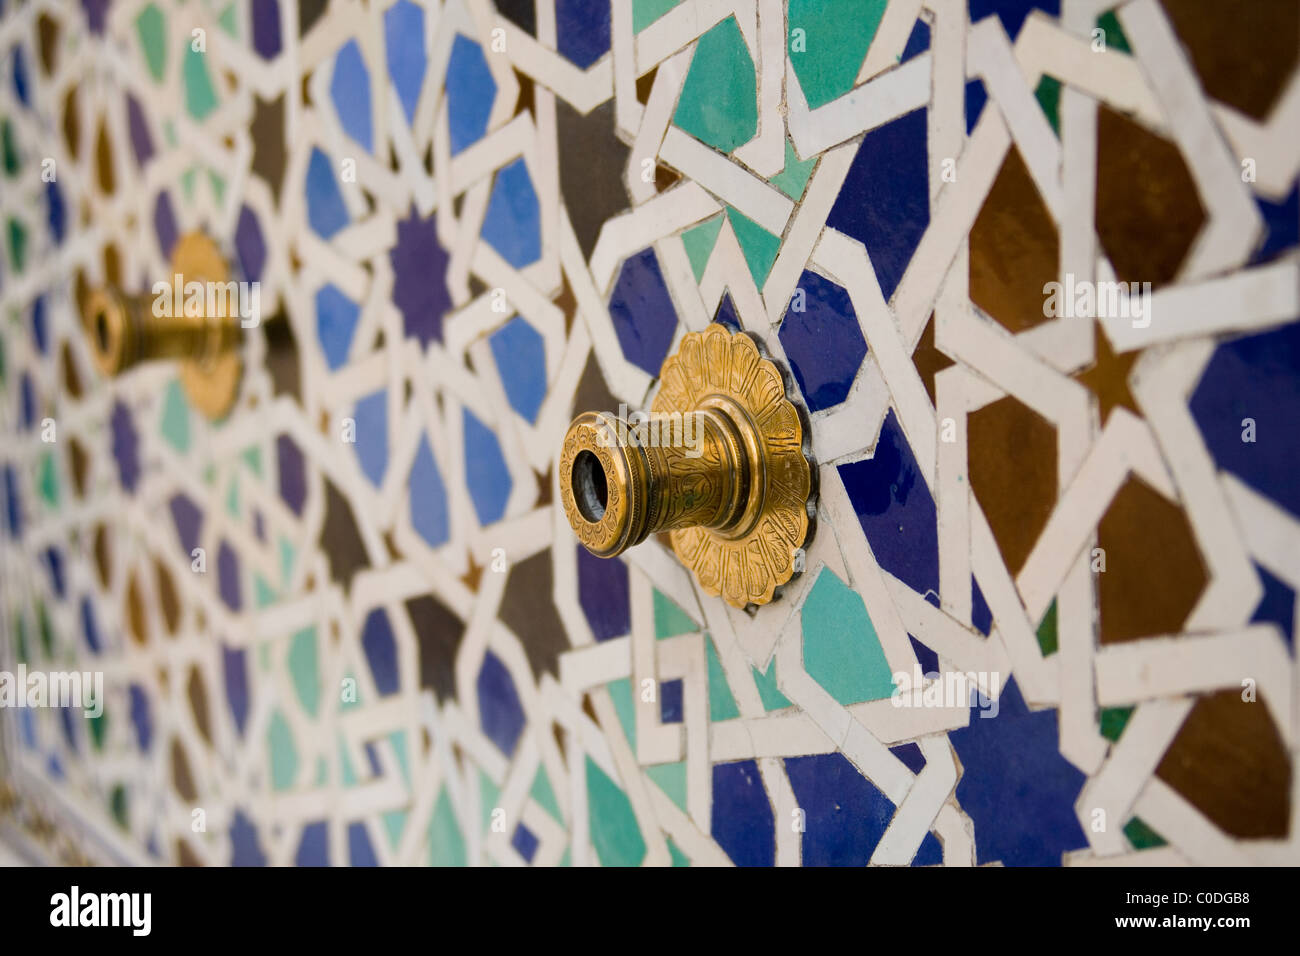 Typical moroccan tiled fountain in the city of Rabat, near the Hassan II Tower. Stock Photo